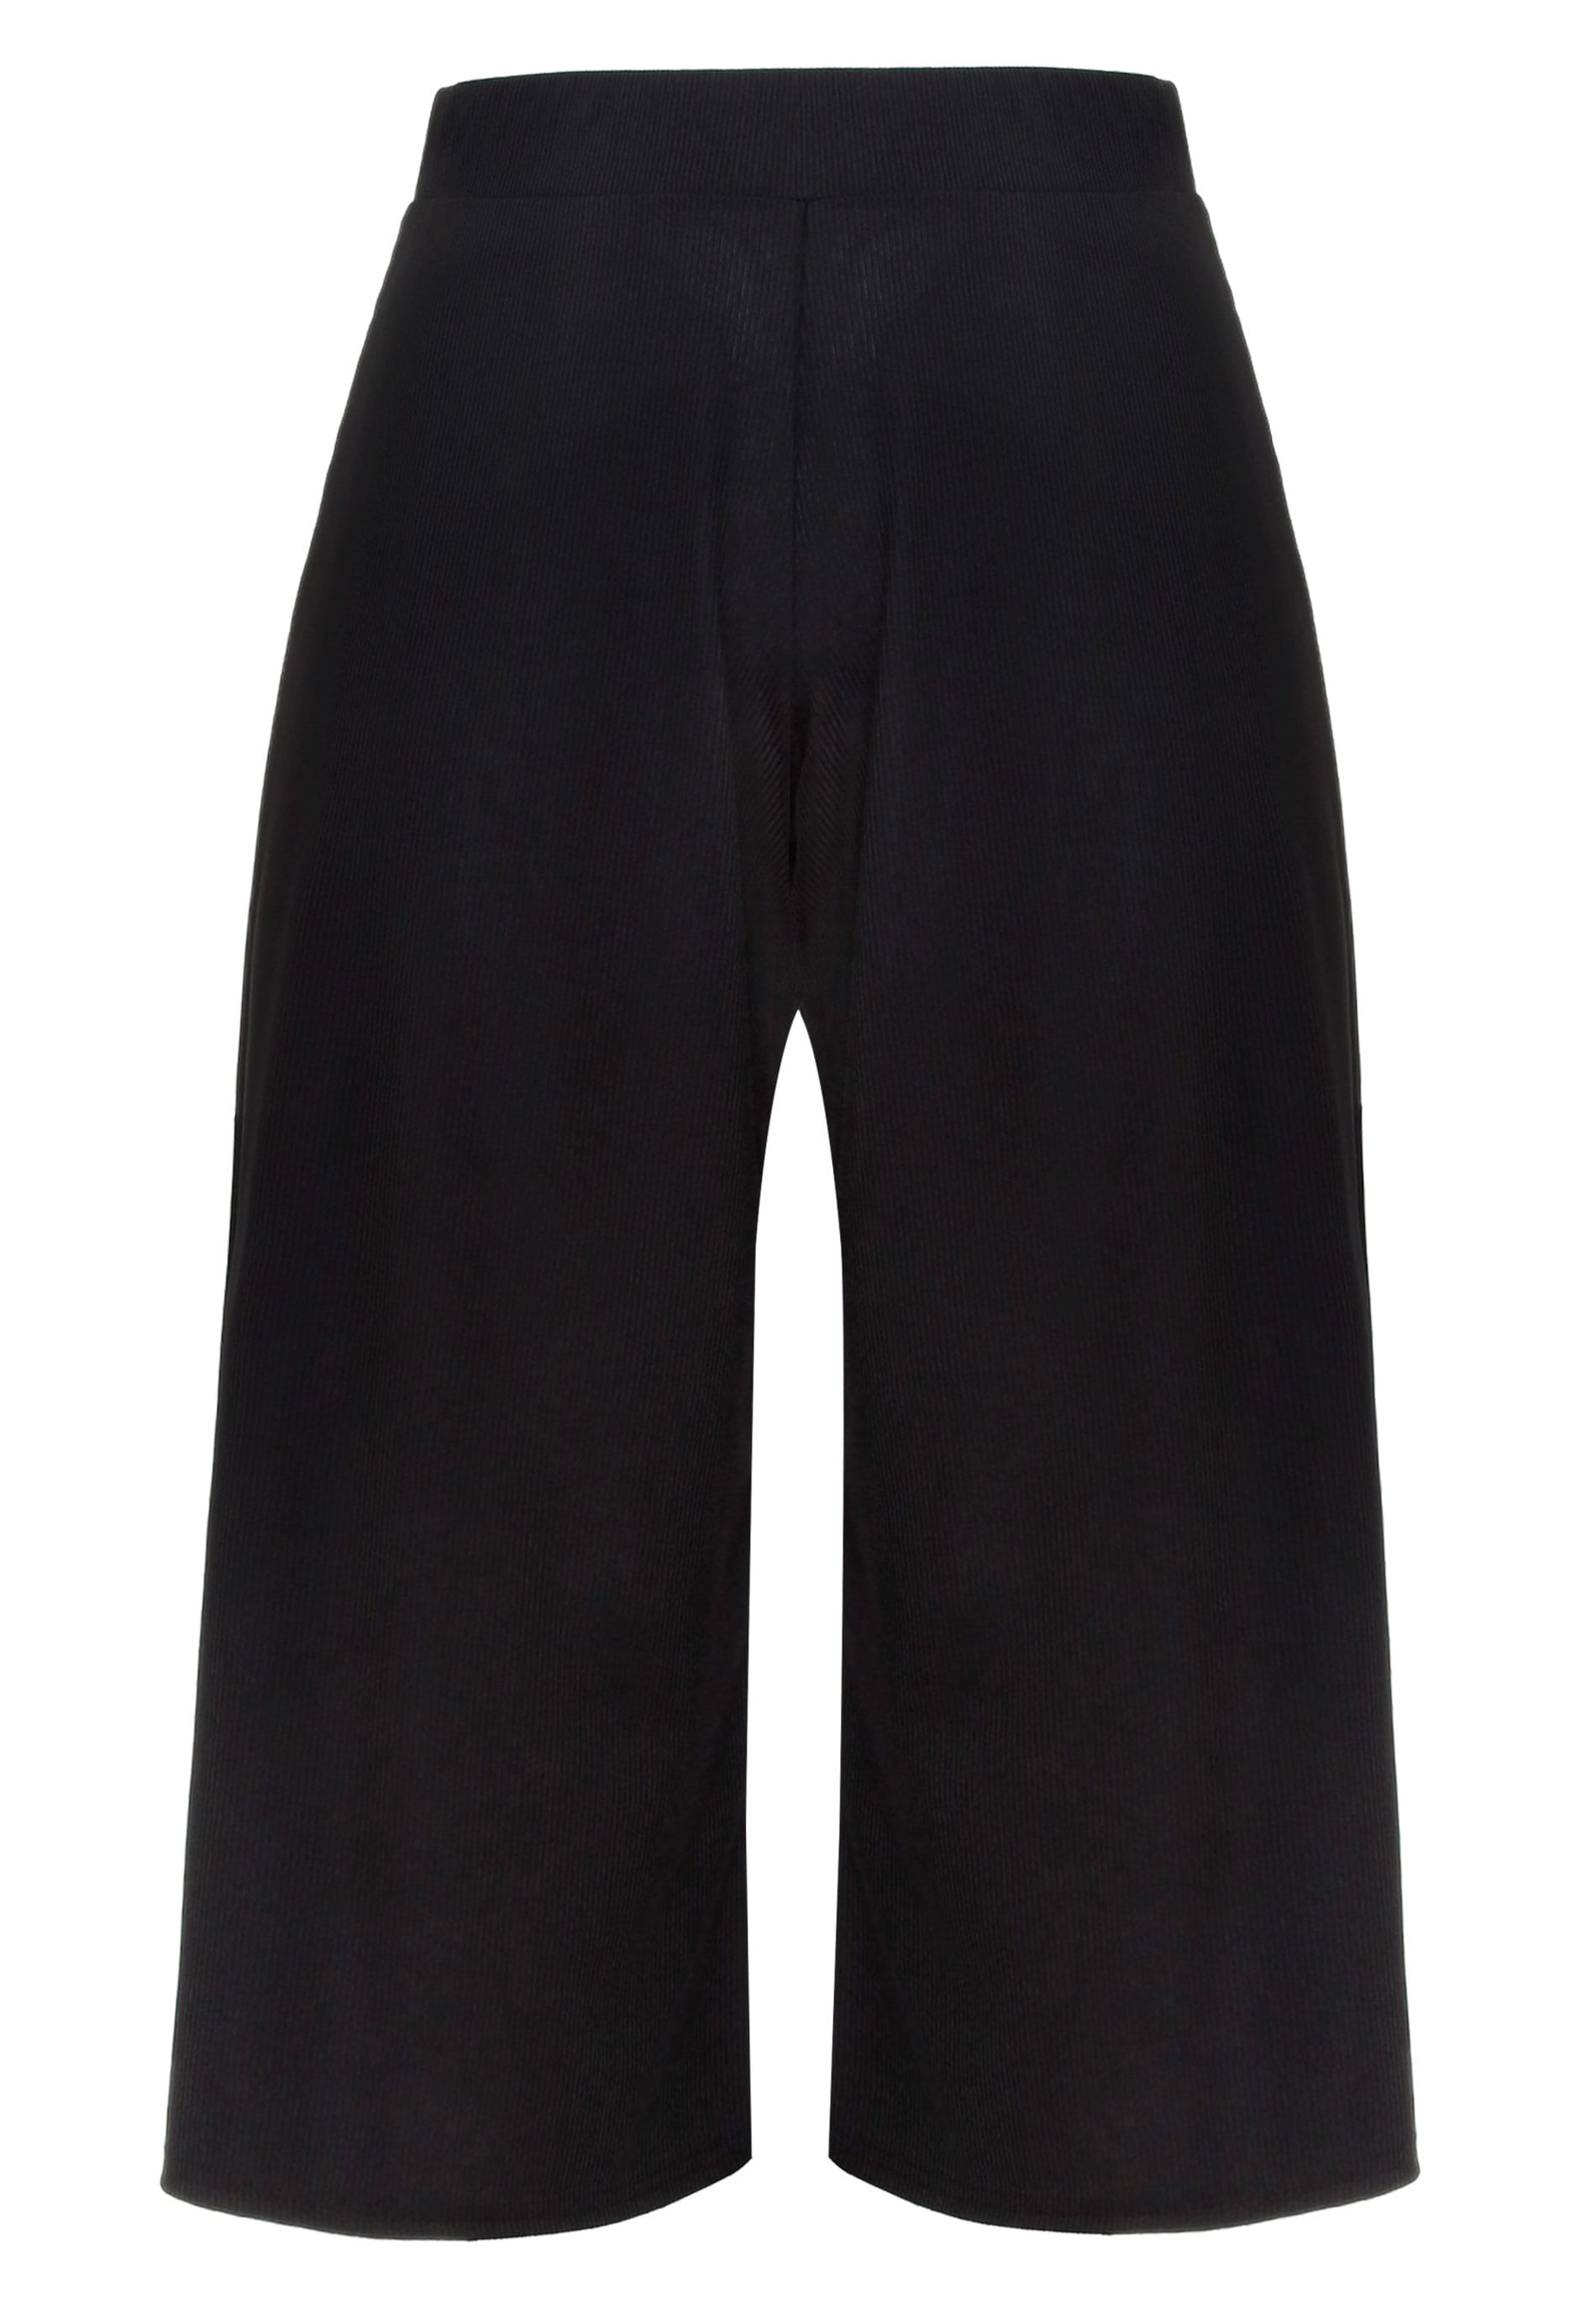 LIMITED COLLECTION Black Ribbed Culottes | Yours Clothing